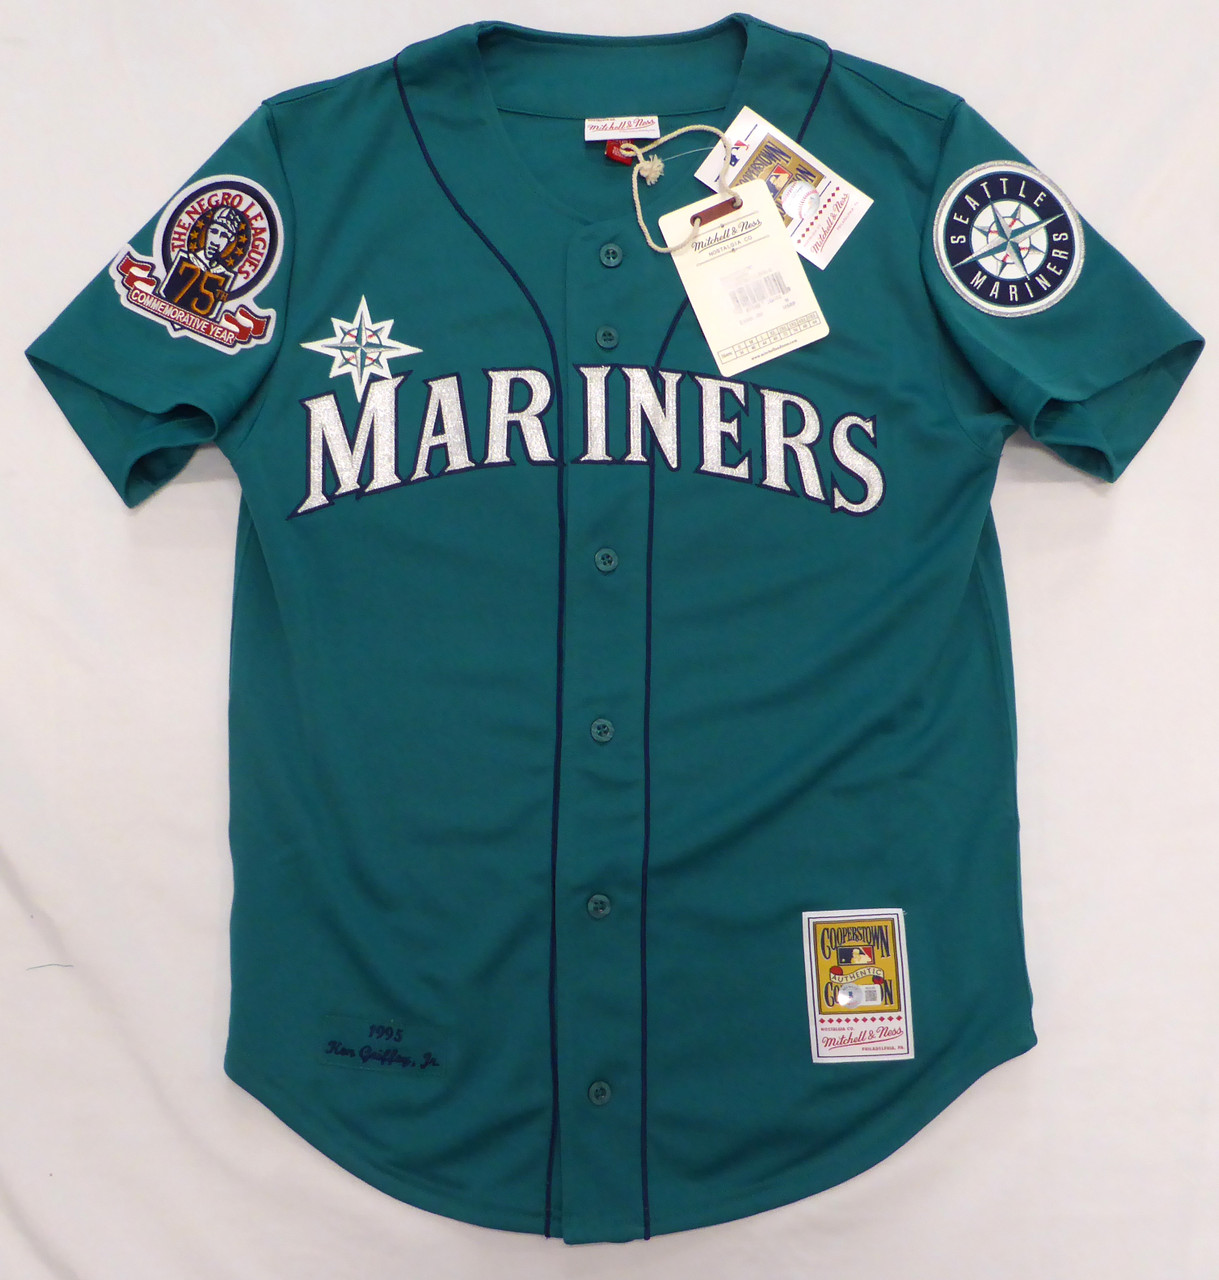 Seattle Mariners Ken Griffey Jr. Autographed Teal Authentic Mitchell & Ness  1995 Authentic Cooperstown Collection Jersey Size XL Negro League Patch